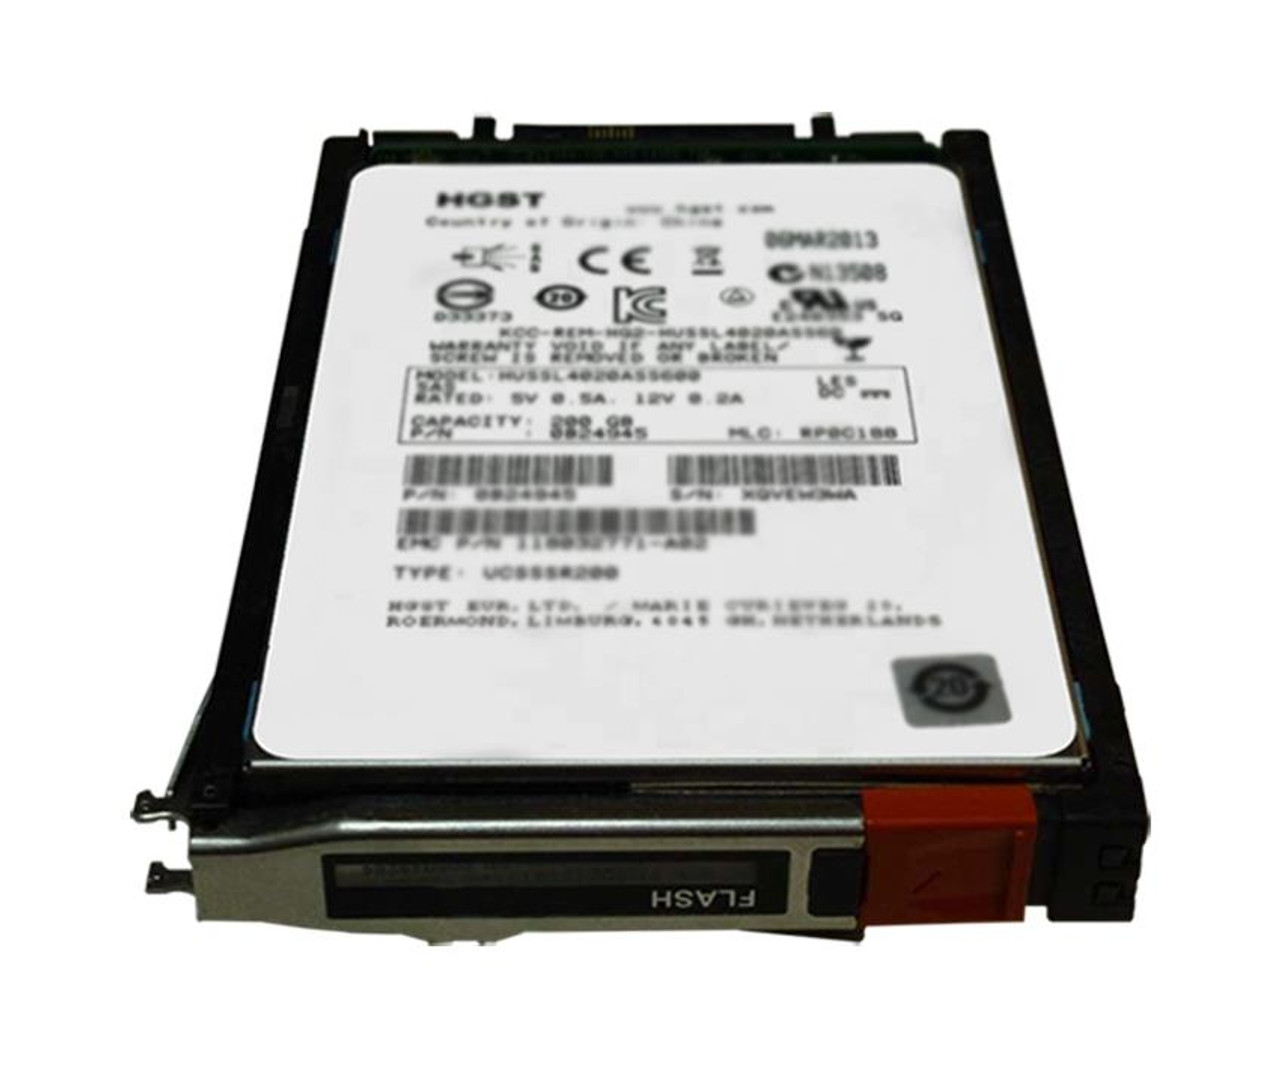 D3F-D2S12FXL-800U EMC 800GB SAS 12Gbps 2.5-inch Internal Solid State Drive (SSD) Upgrade for Unity AFA 80 x 2.5 Enclosure